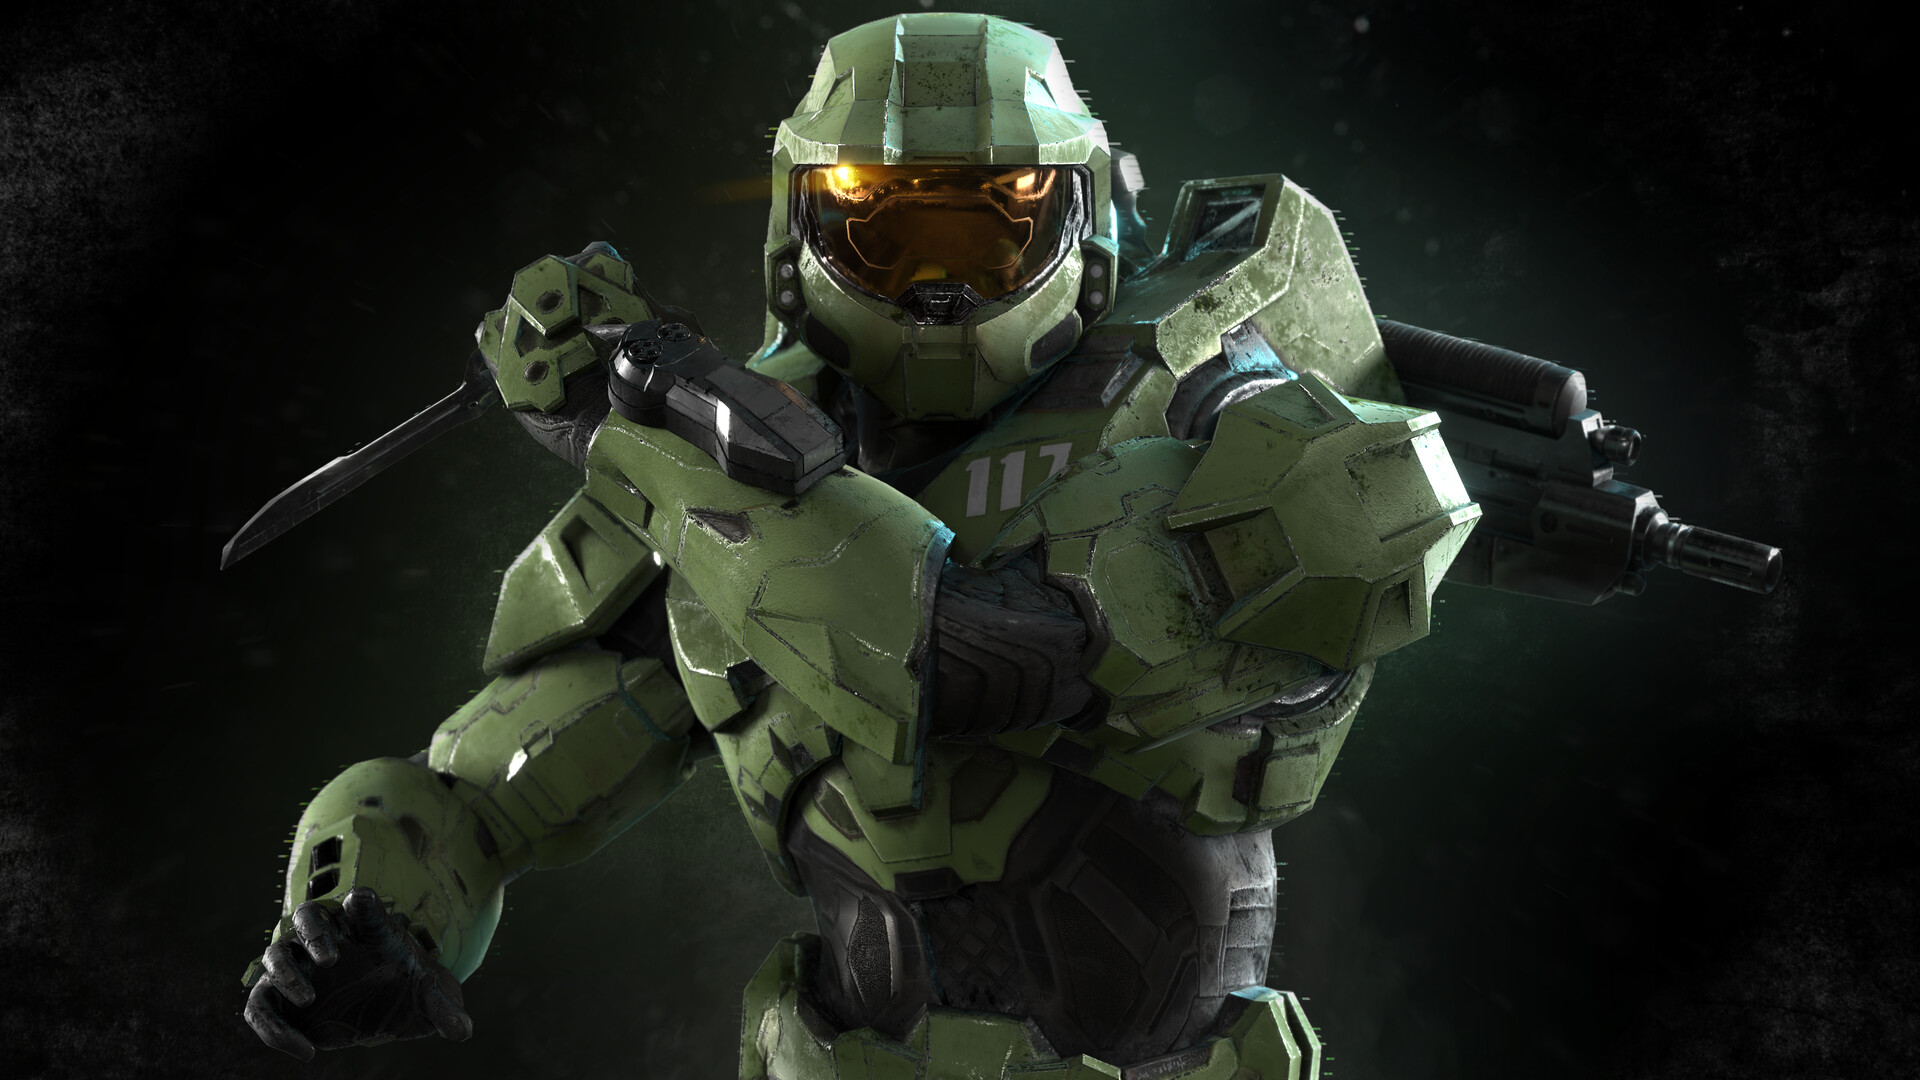 DOWNLOAD: https://imgur.com/a/rqvECbO Remake of a Halo 4 Master Chief Stanc...